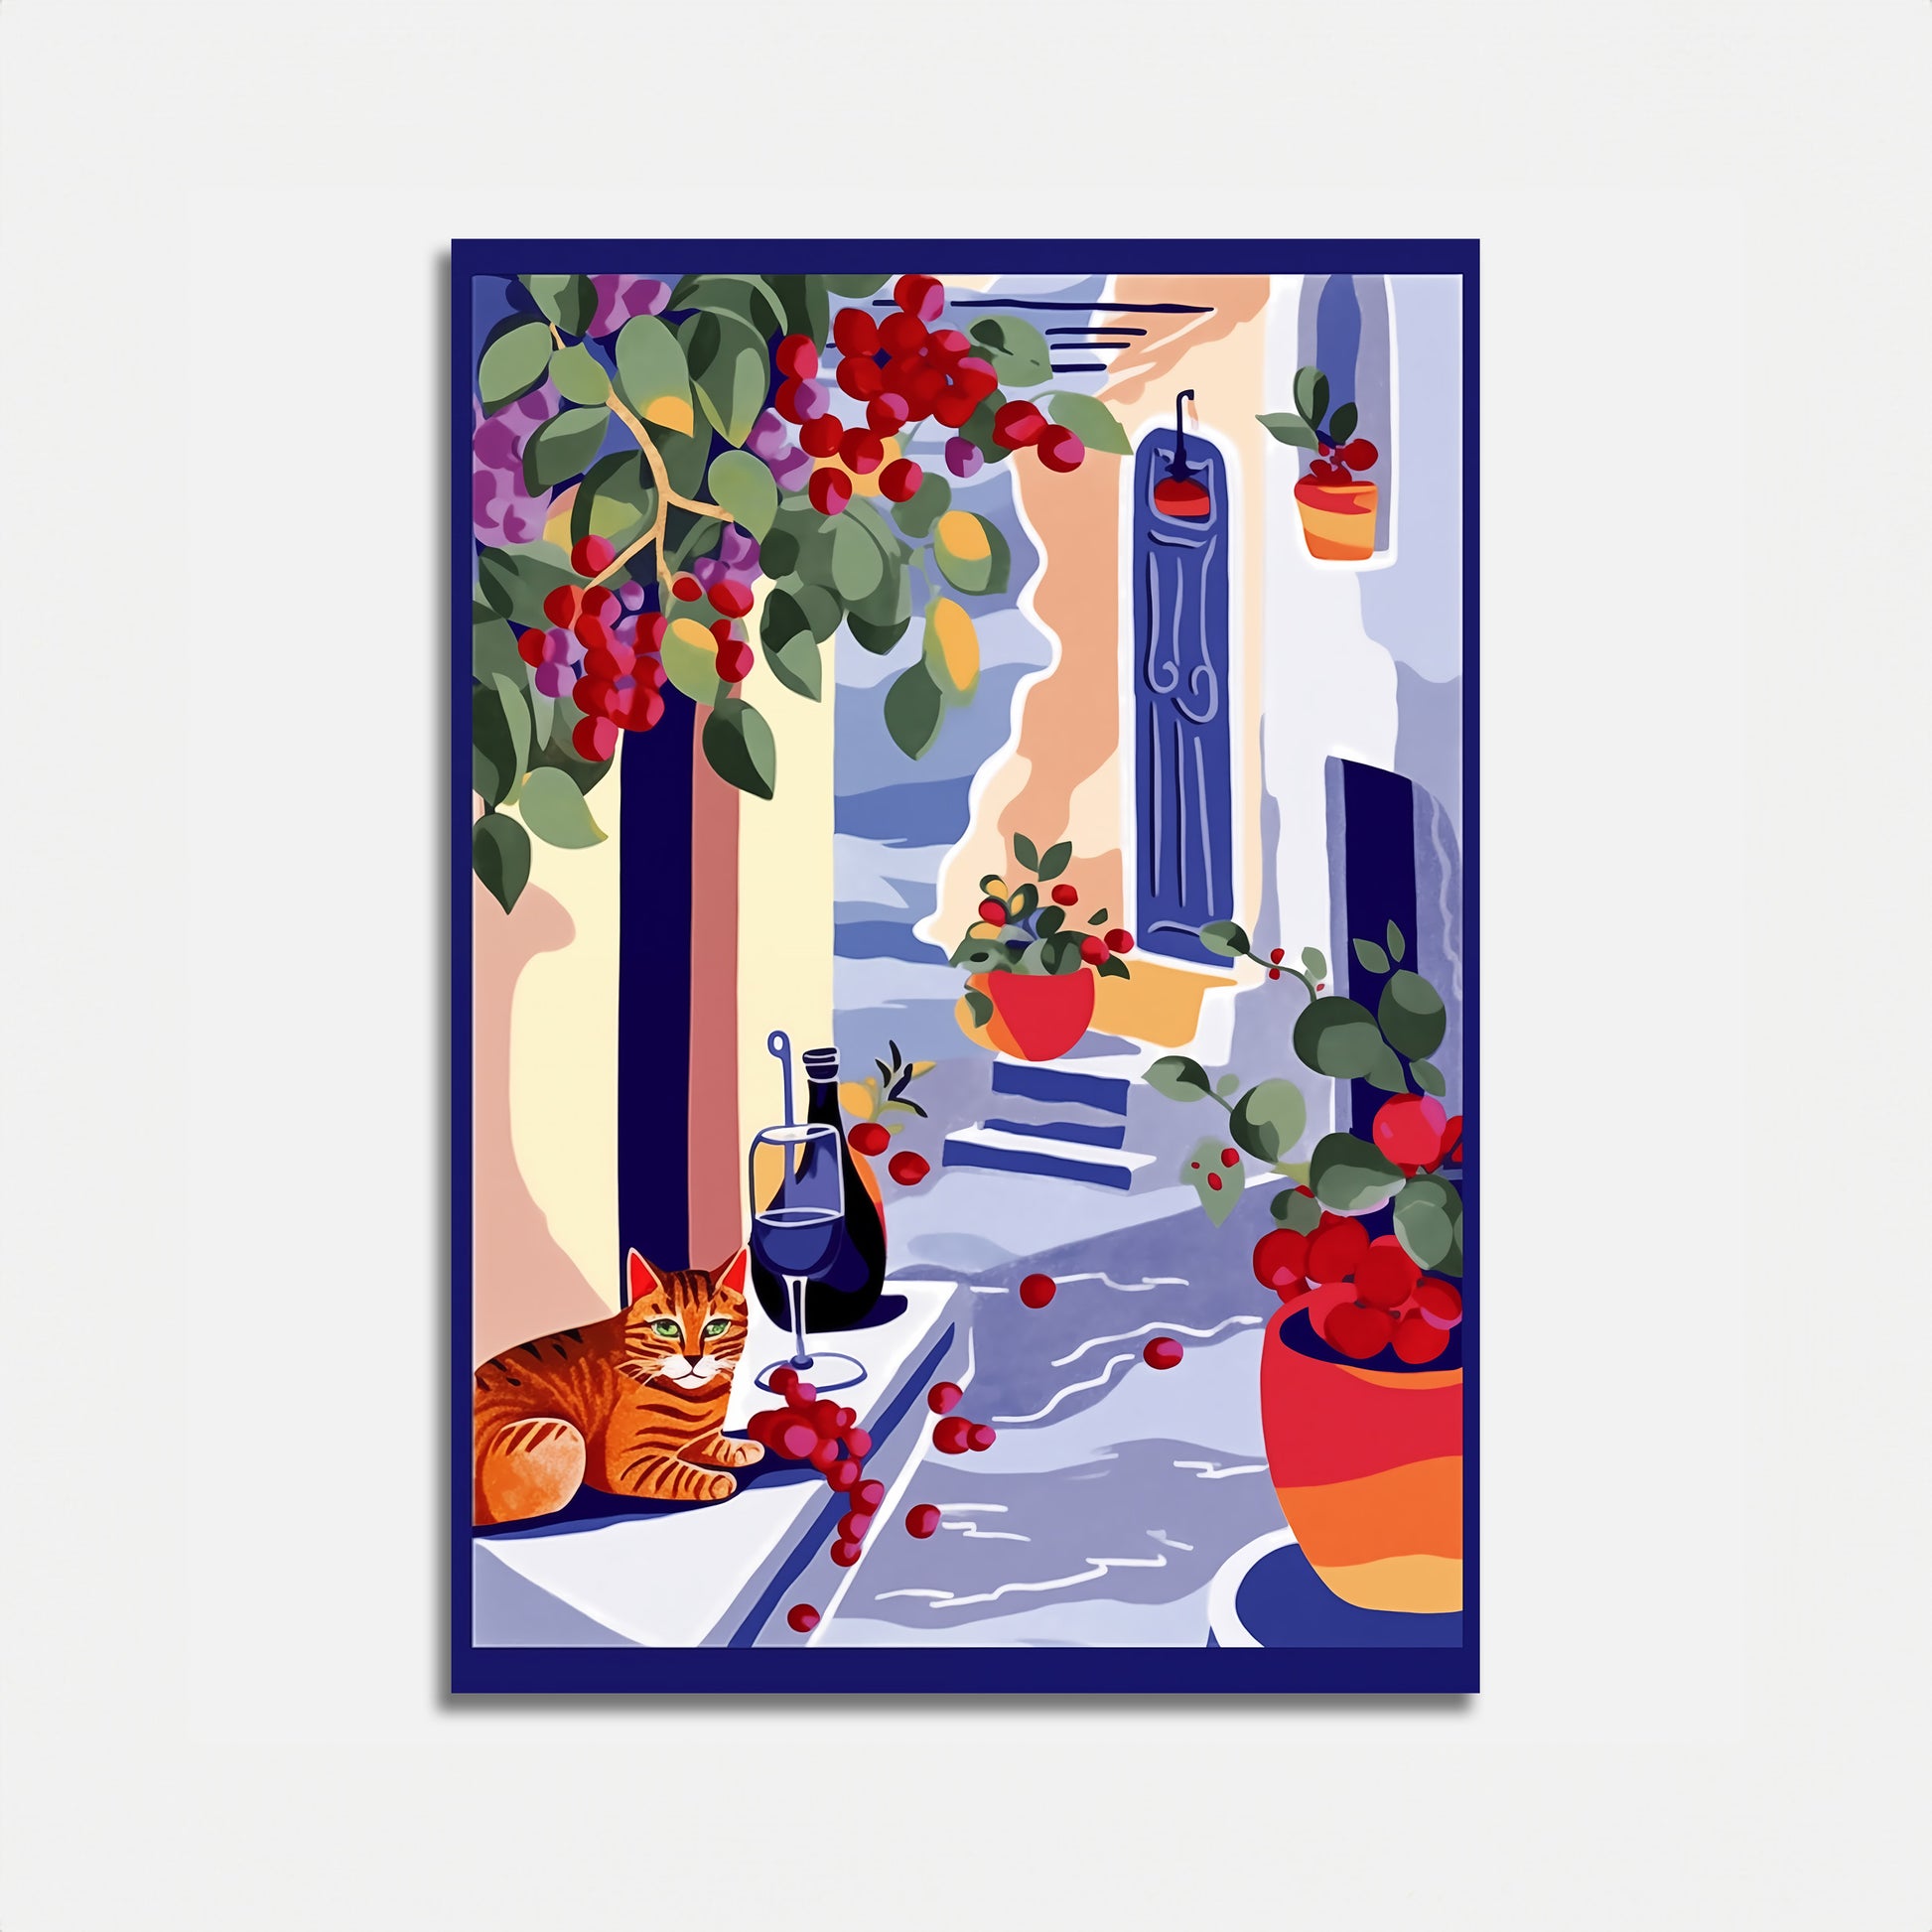 Colorful illustration of a Mediterranean-style balcony with plants, a resting cat, and a glass of wine.